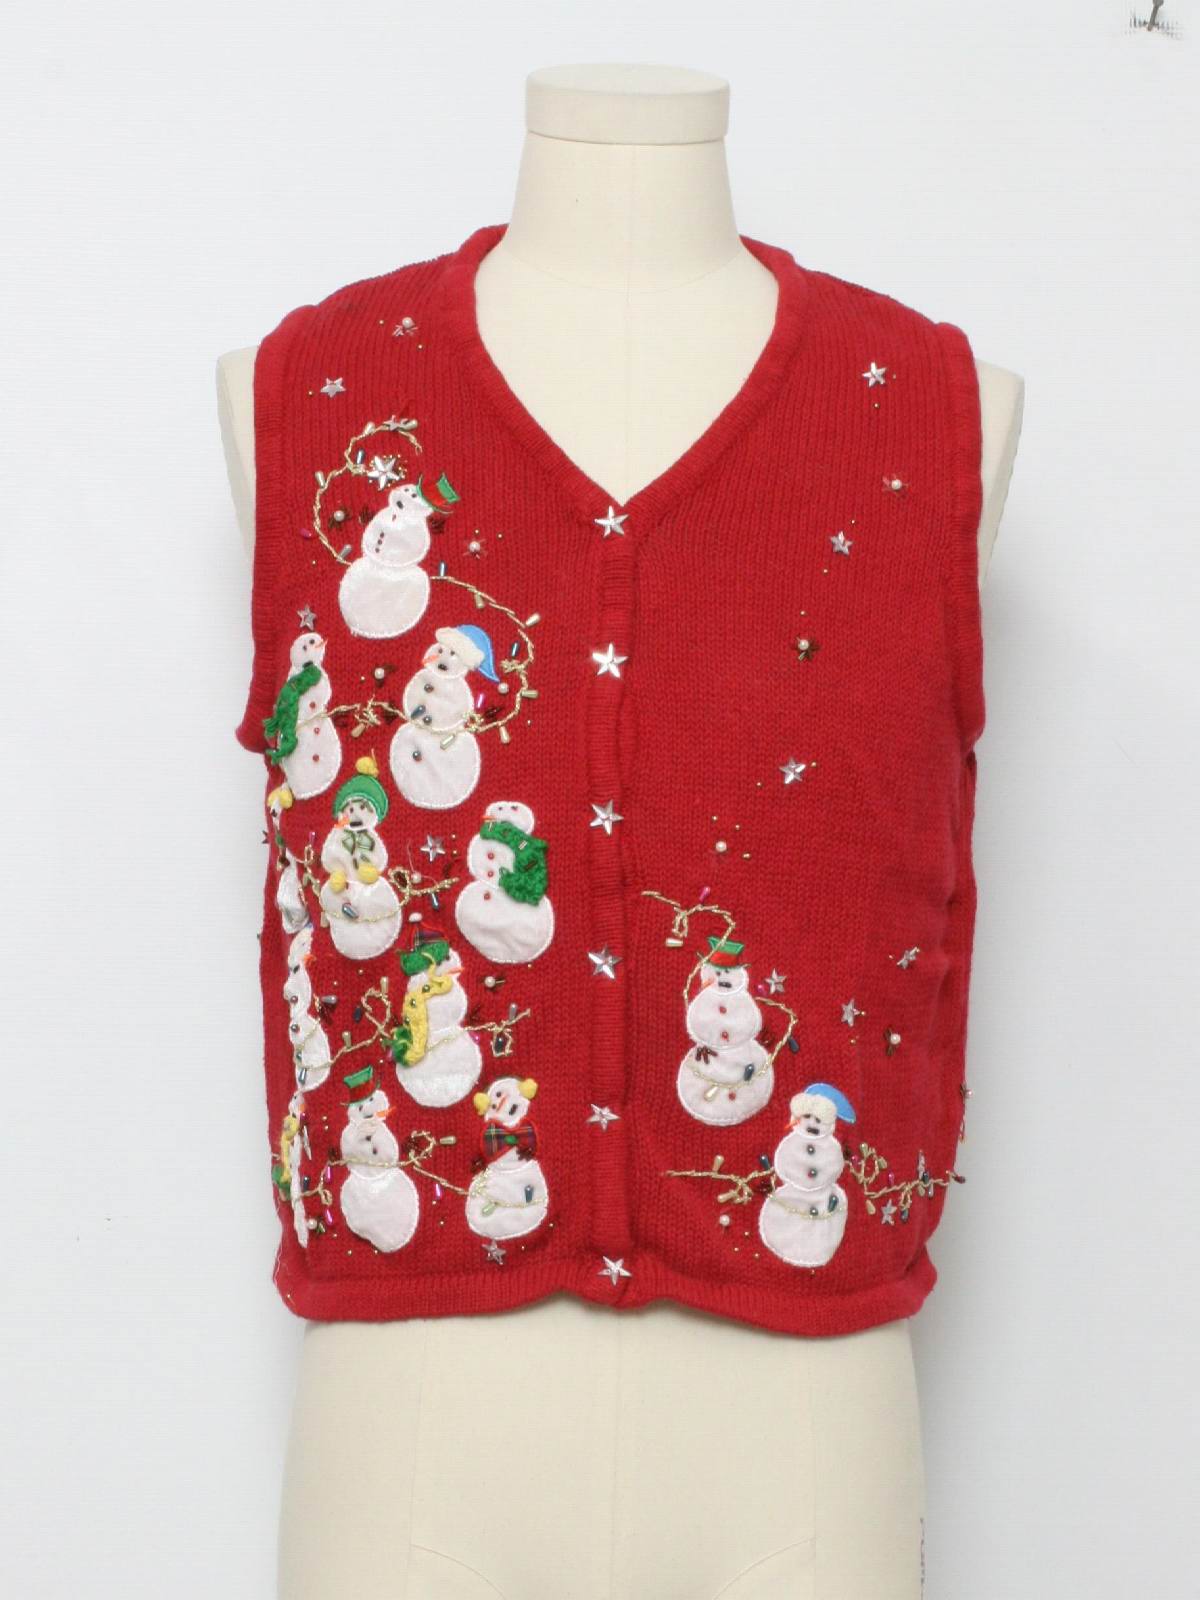 Womens Ugly Christmas Sweater Vest: -Care Label Only- Petite Womens Red ...